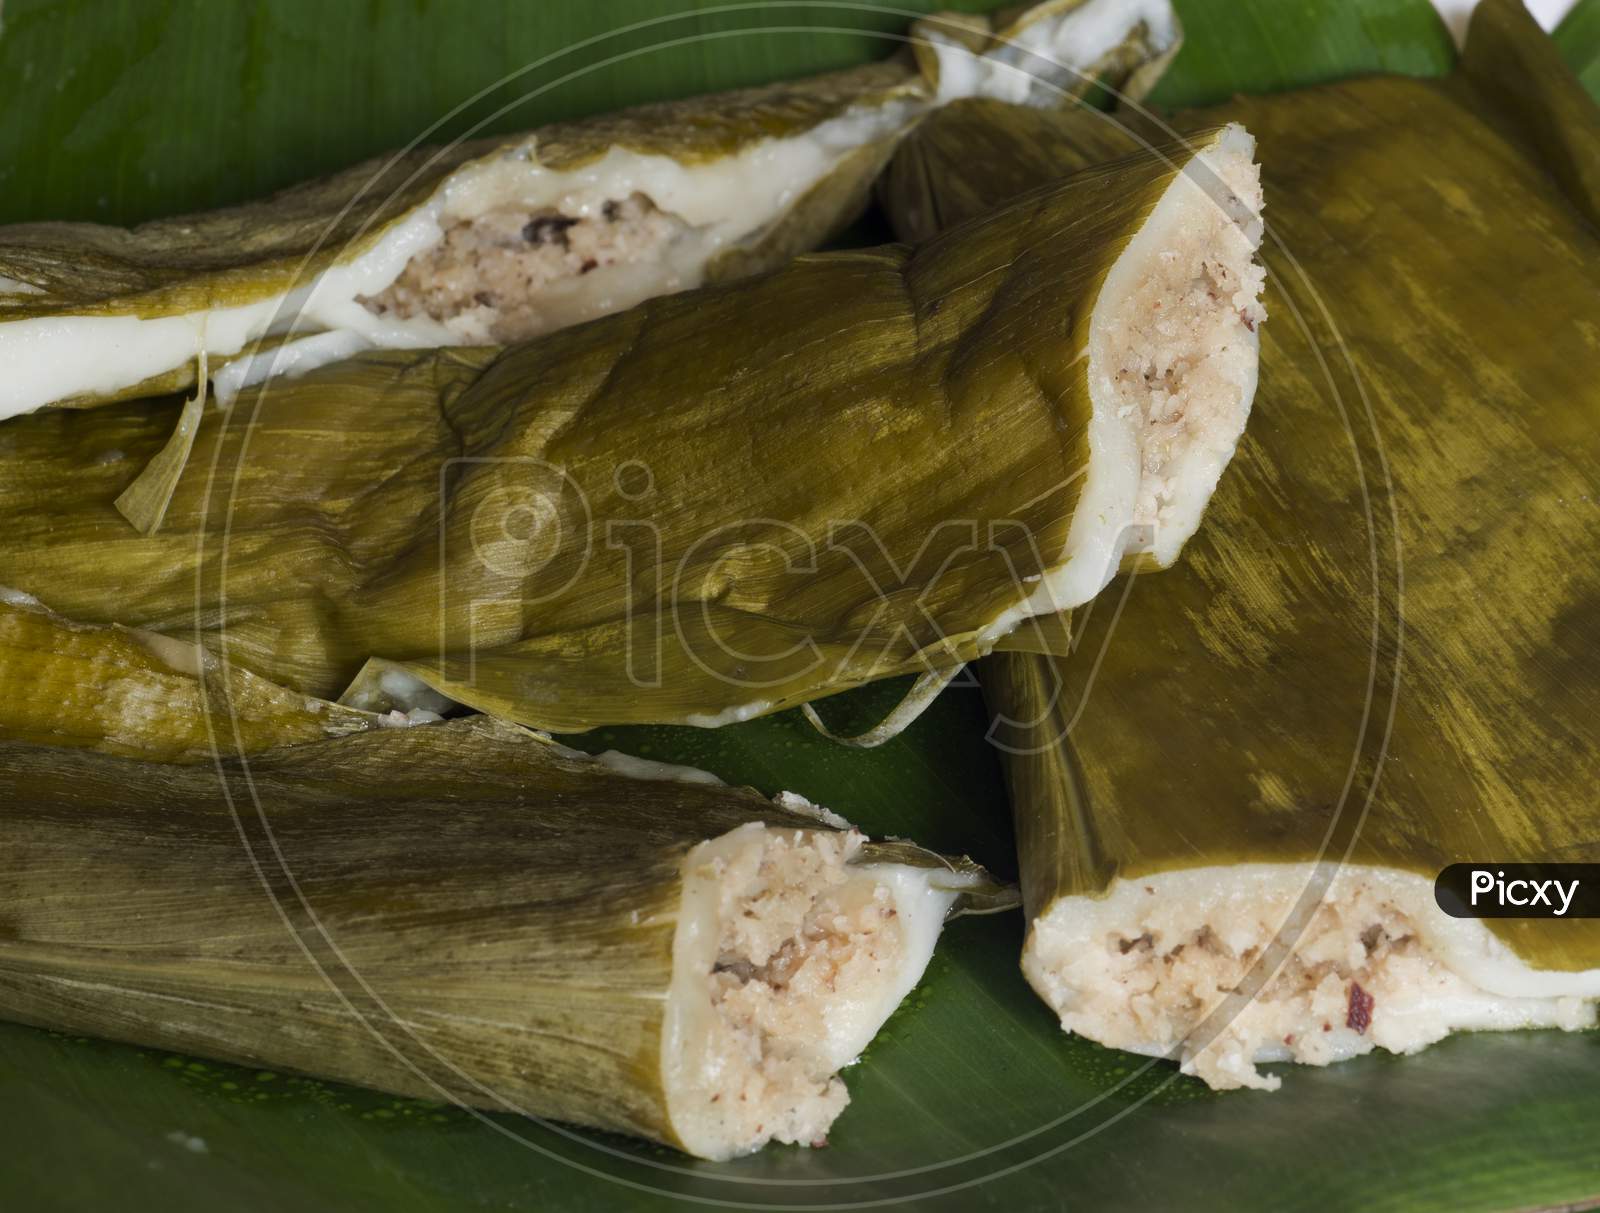 Indian Sweet Called Patholis Made Of Steamed Rice Flour Filled With Jaggery, Cardamom And Coconut. Wrapped In Turmeric Leaves And Steam Cooked In Large Vessel.